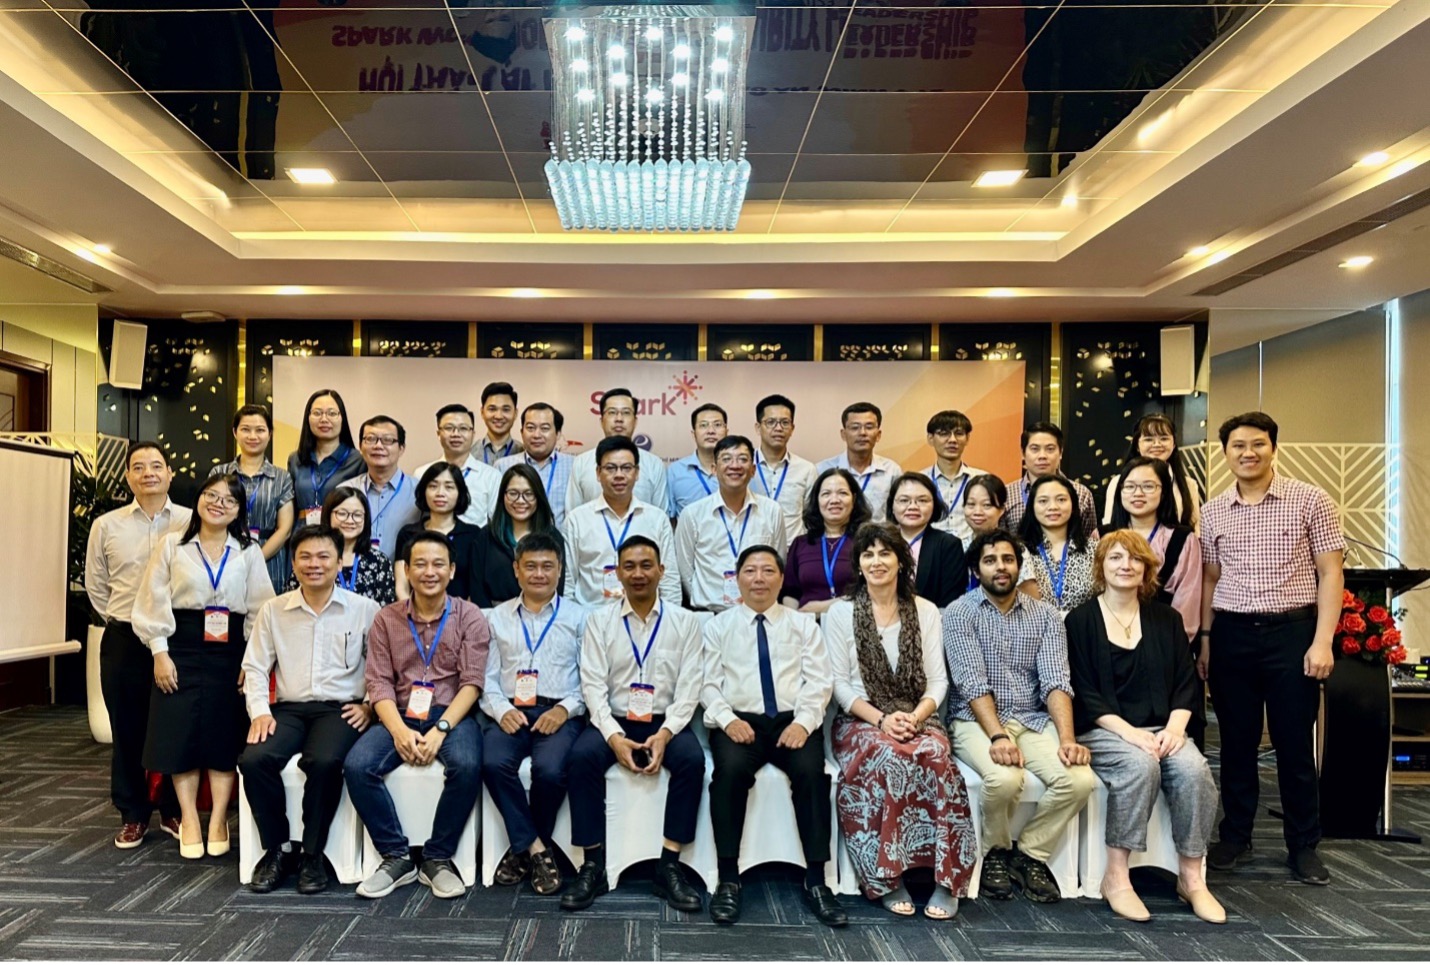 Photograph showing participants of the workshop in Vietnam. Participants are in three rows, with approximately 40 people in the photo.